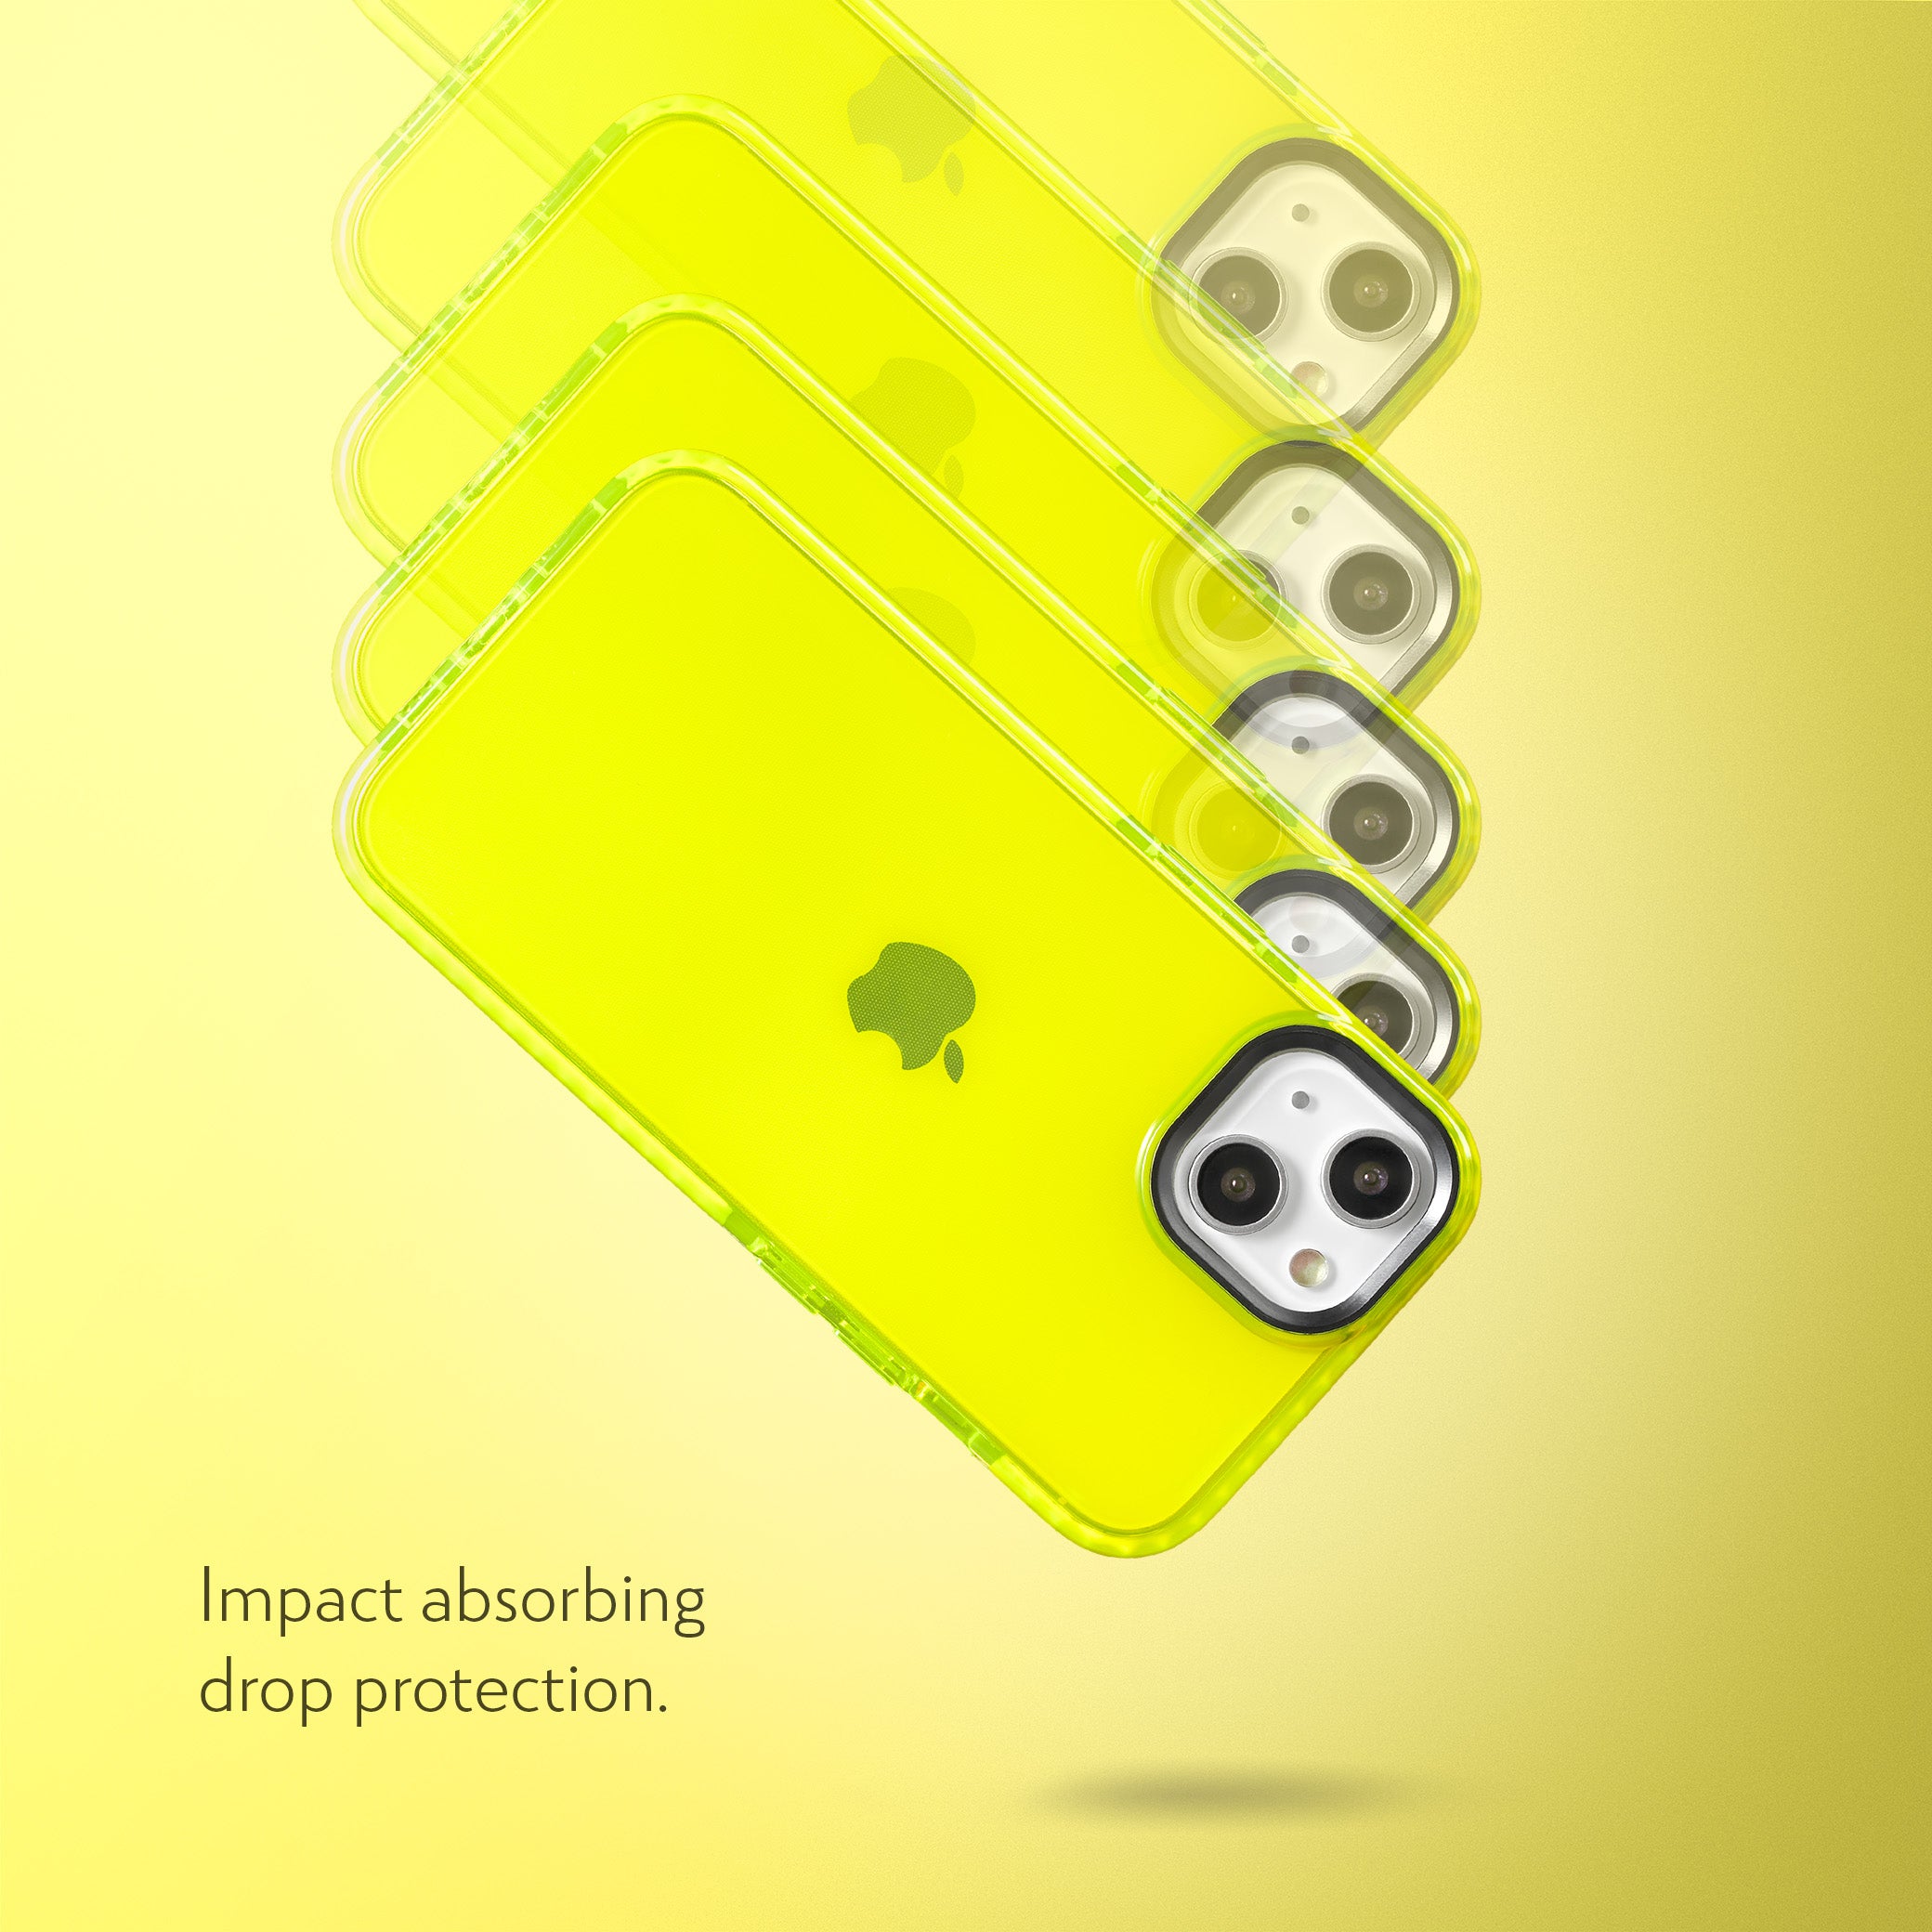 Barrier Case for iPhone 14 - Hi-Energy Neon Yellow